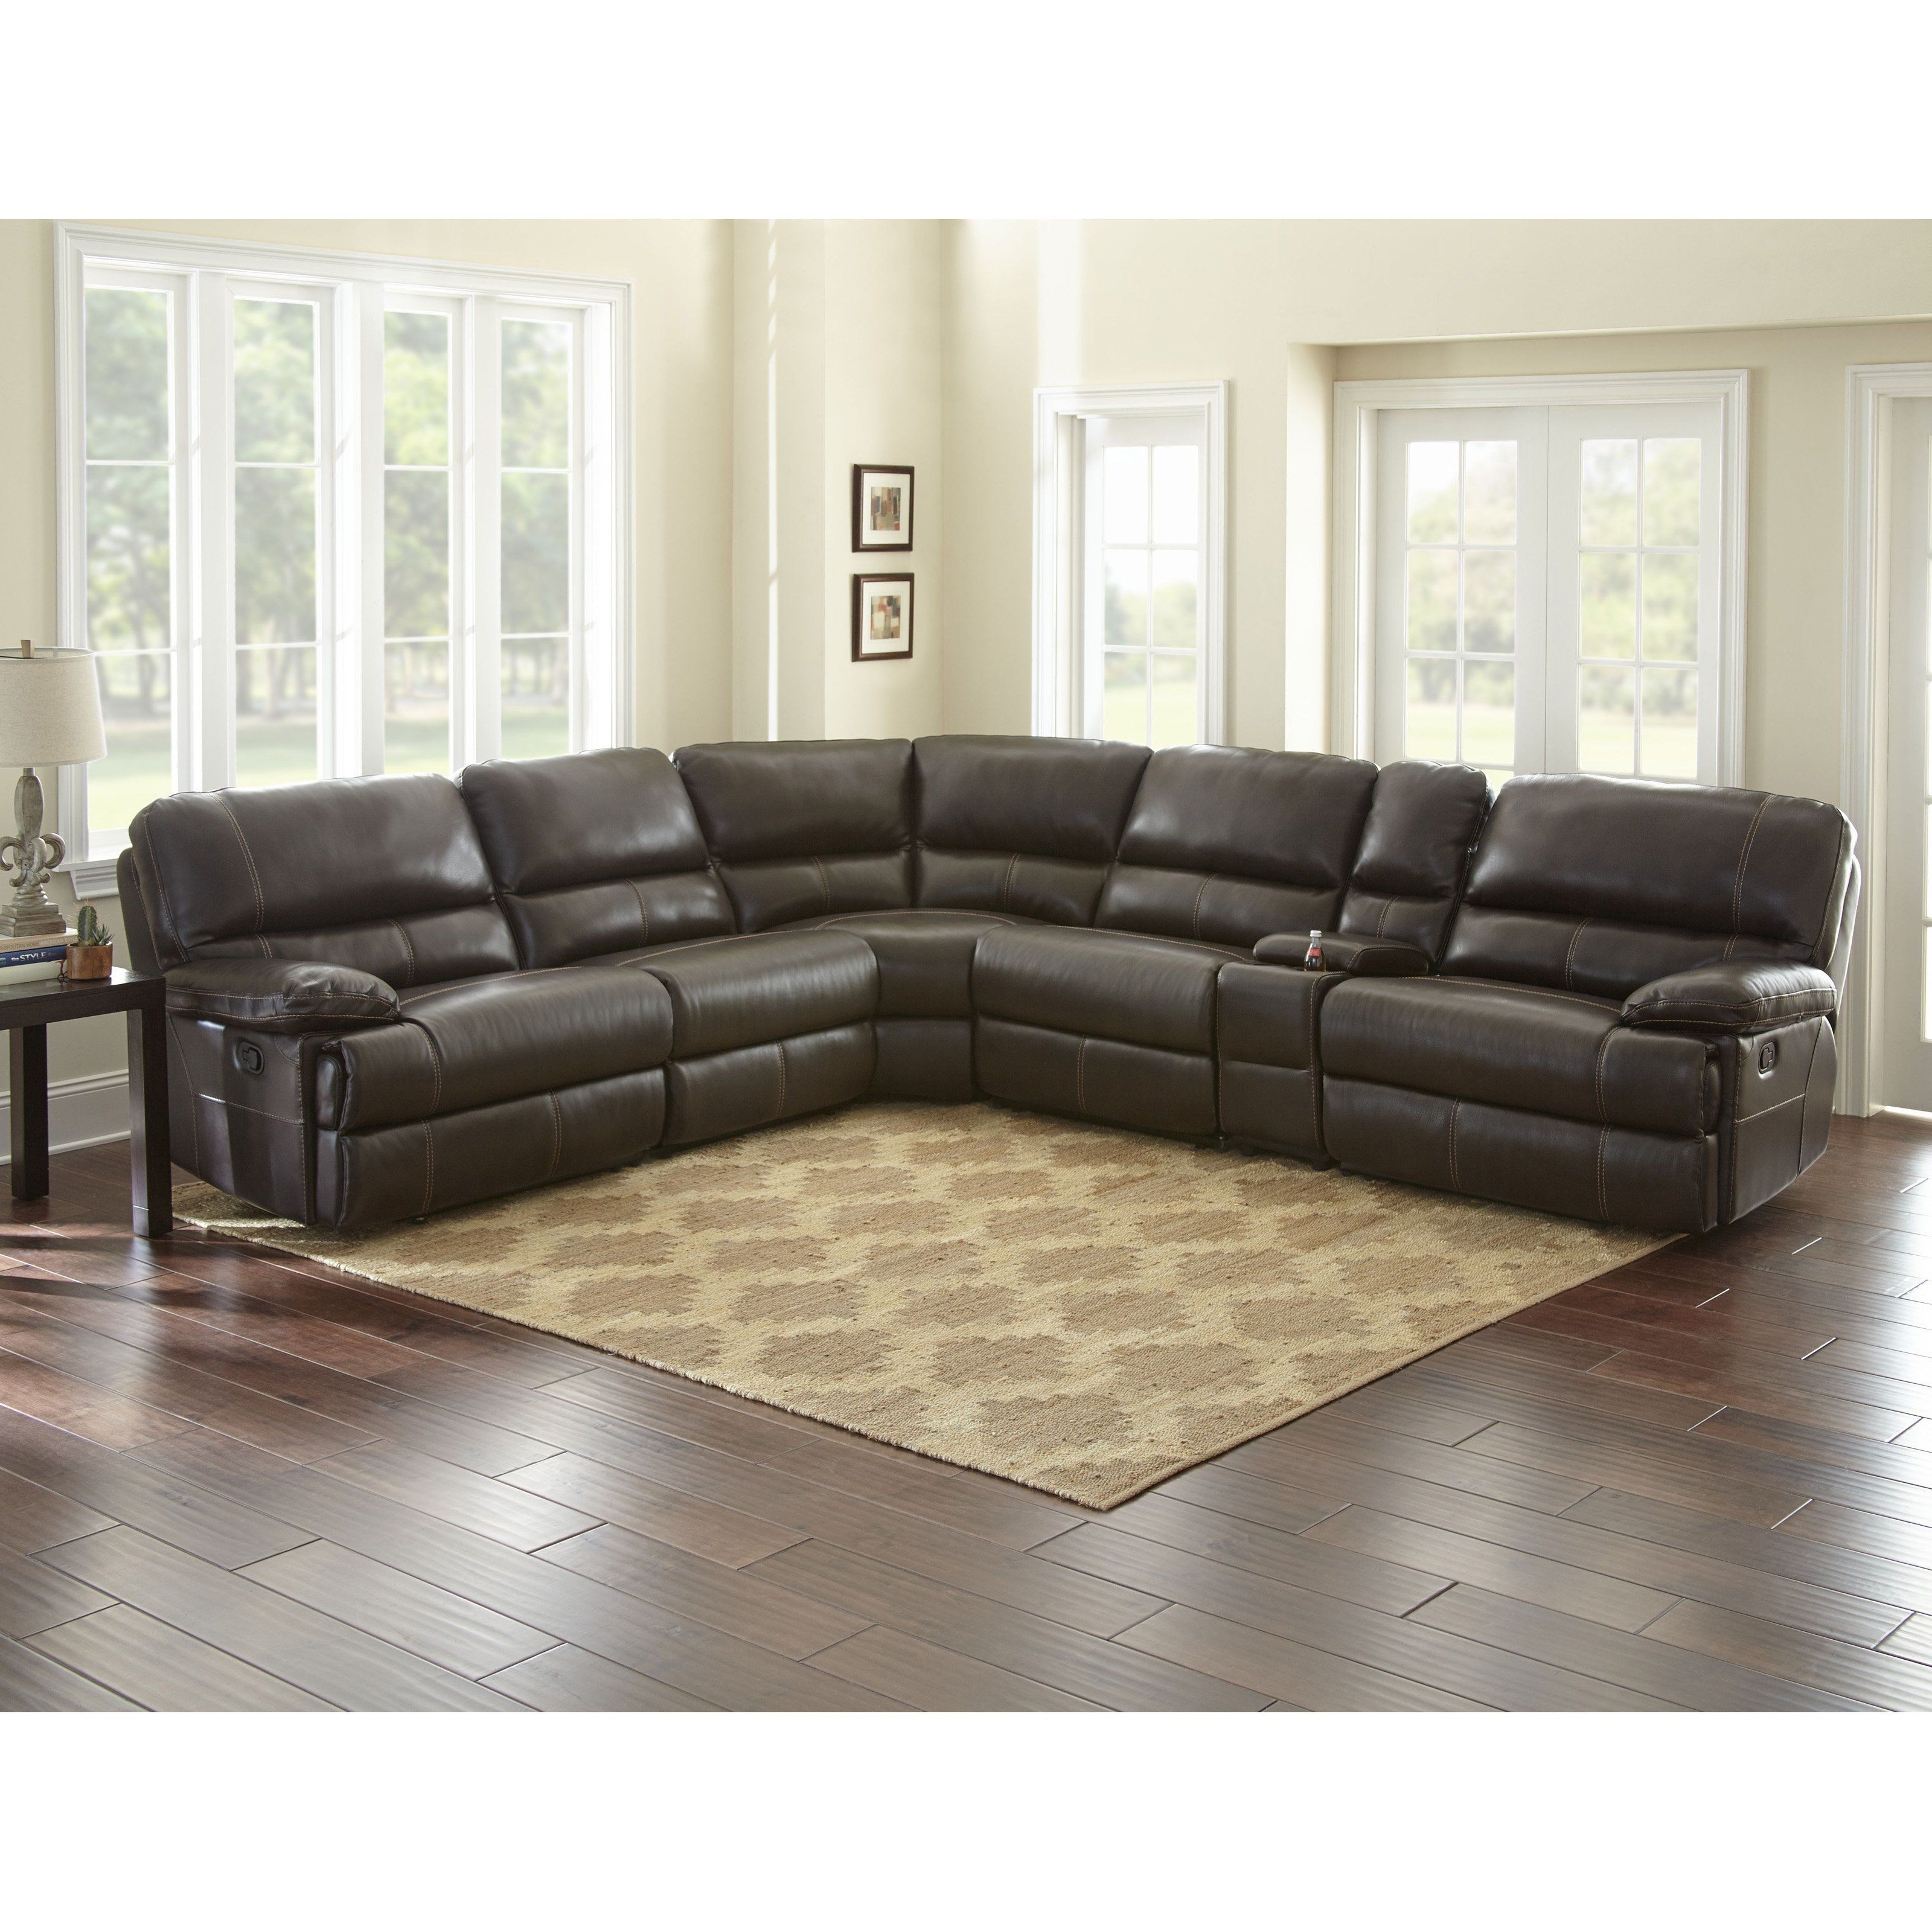 Steve Silver Co. Rollins 6 Piece Reclining Sectional – Rl8506pc Inside Kristen Silver Grey 6 Piece Power Reclining Sectionals (Photo 9 of 25)